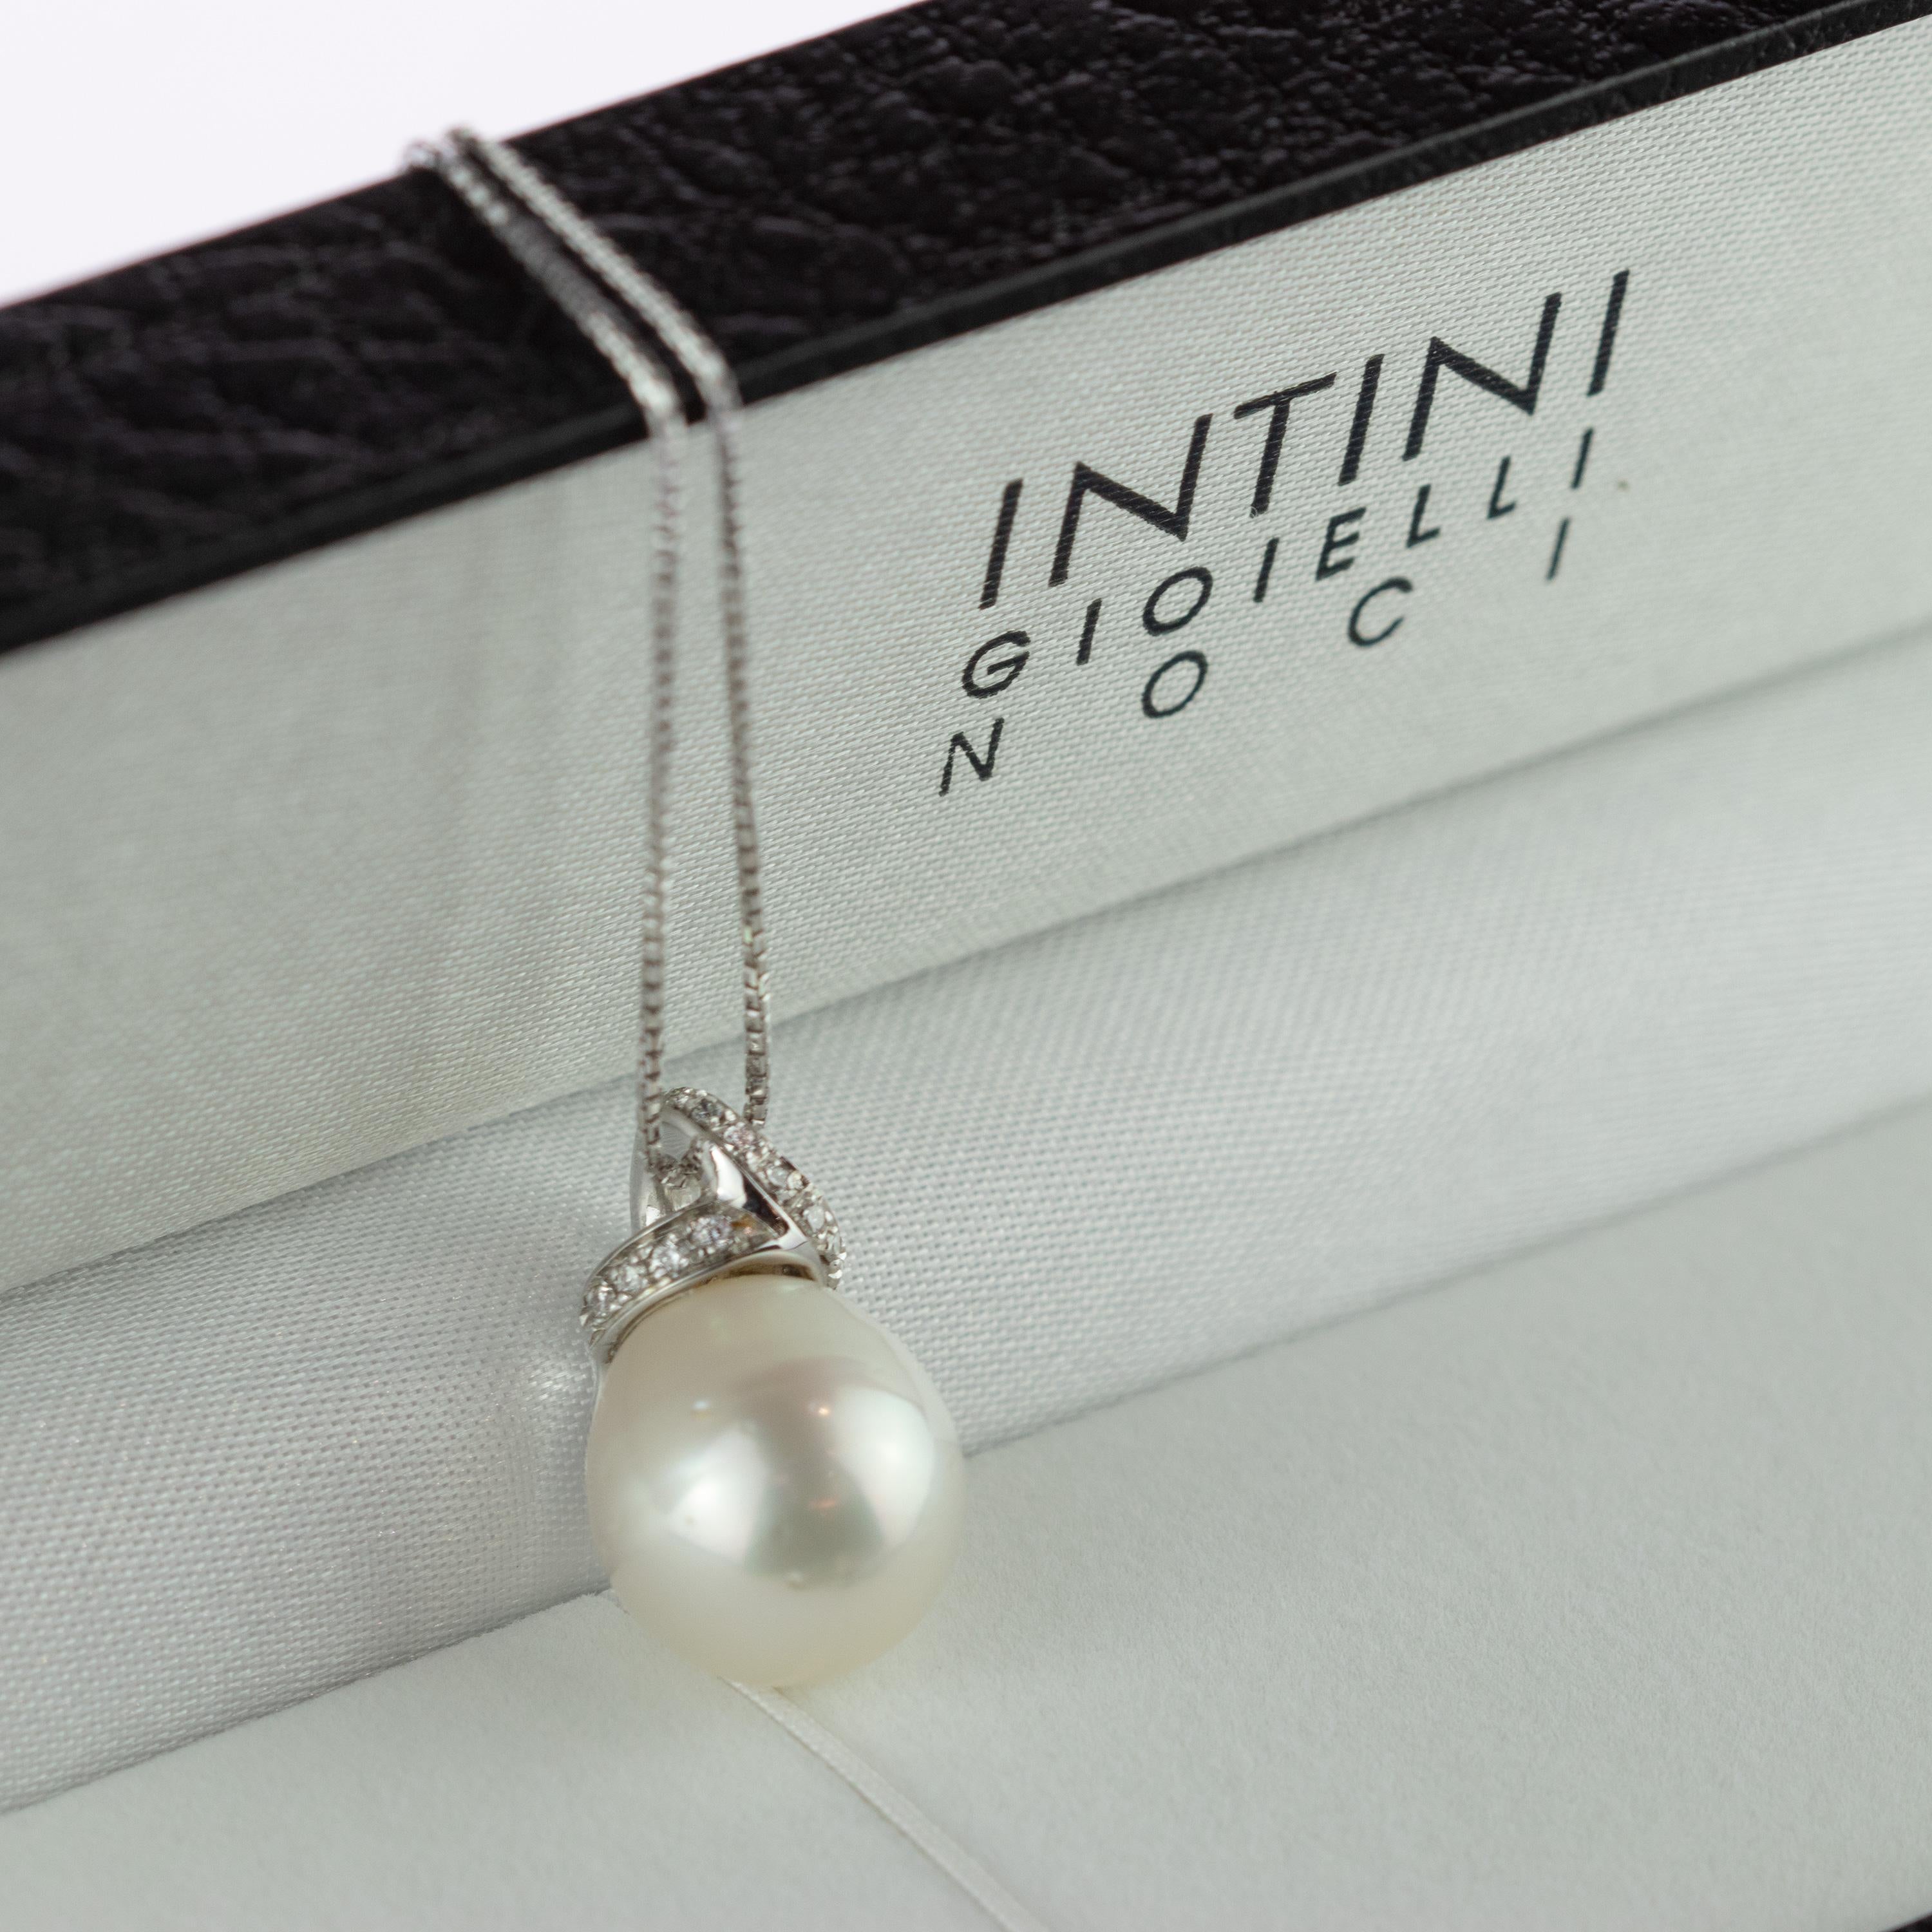 Round Cut Intini Jewels Pearl Diamond Pendant 18 Karat White Gold Crafted Chain Necklace For Sale